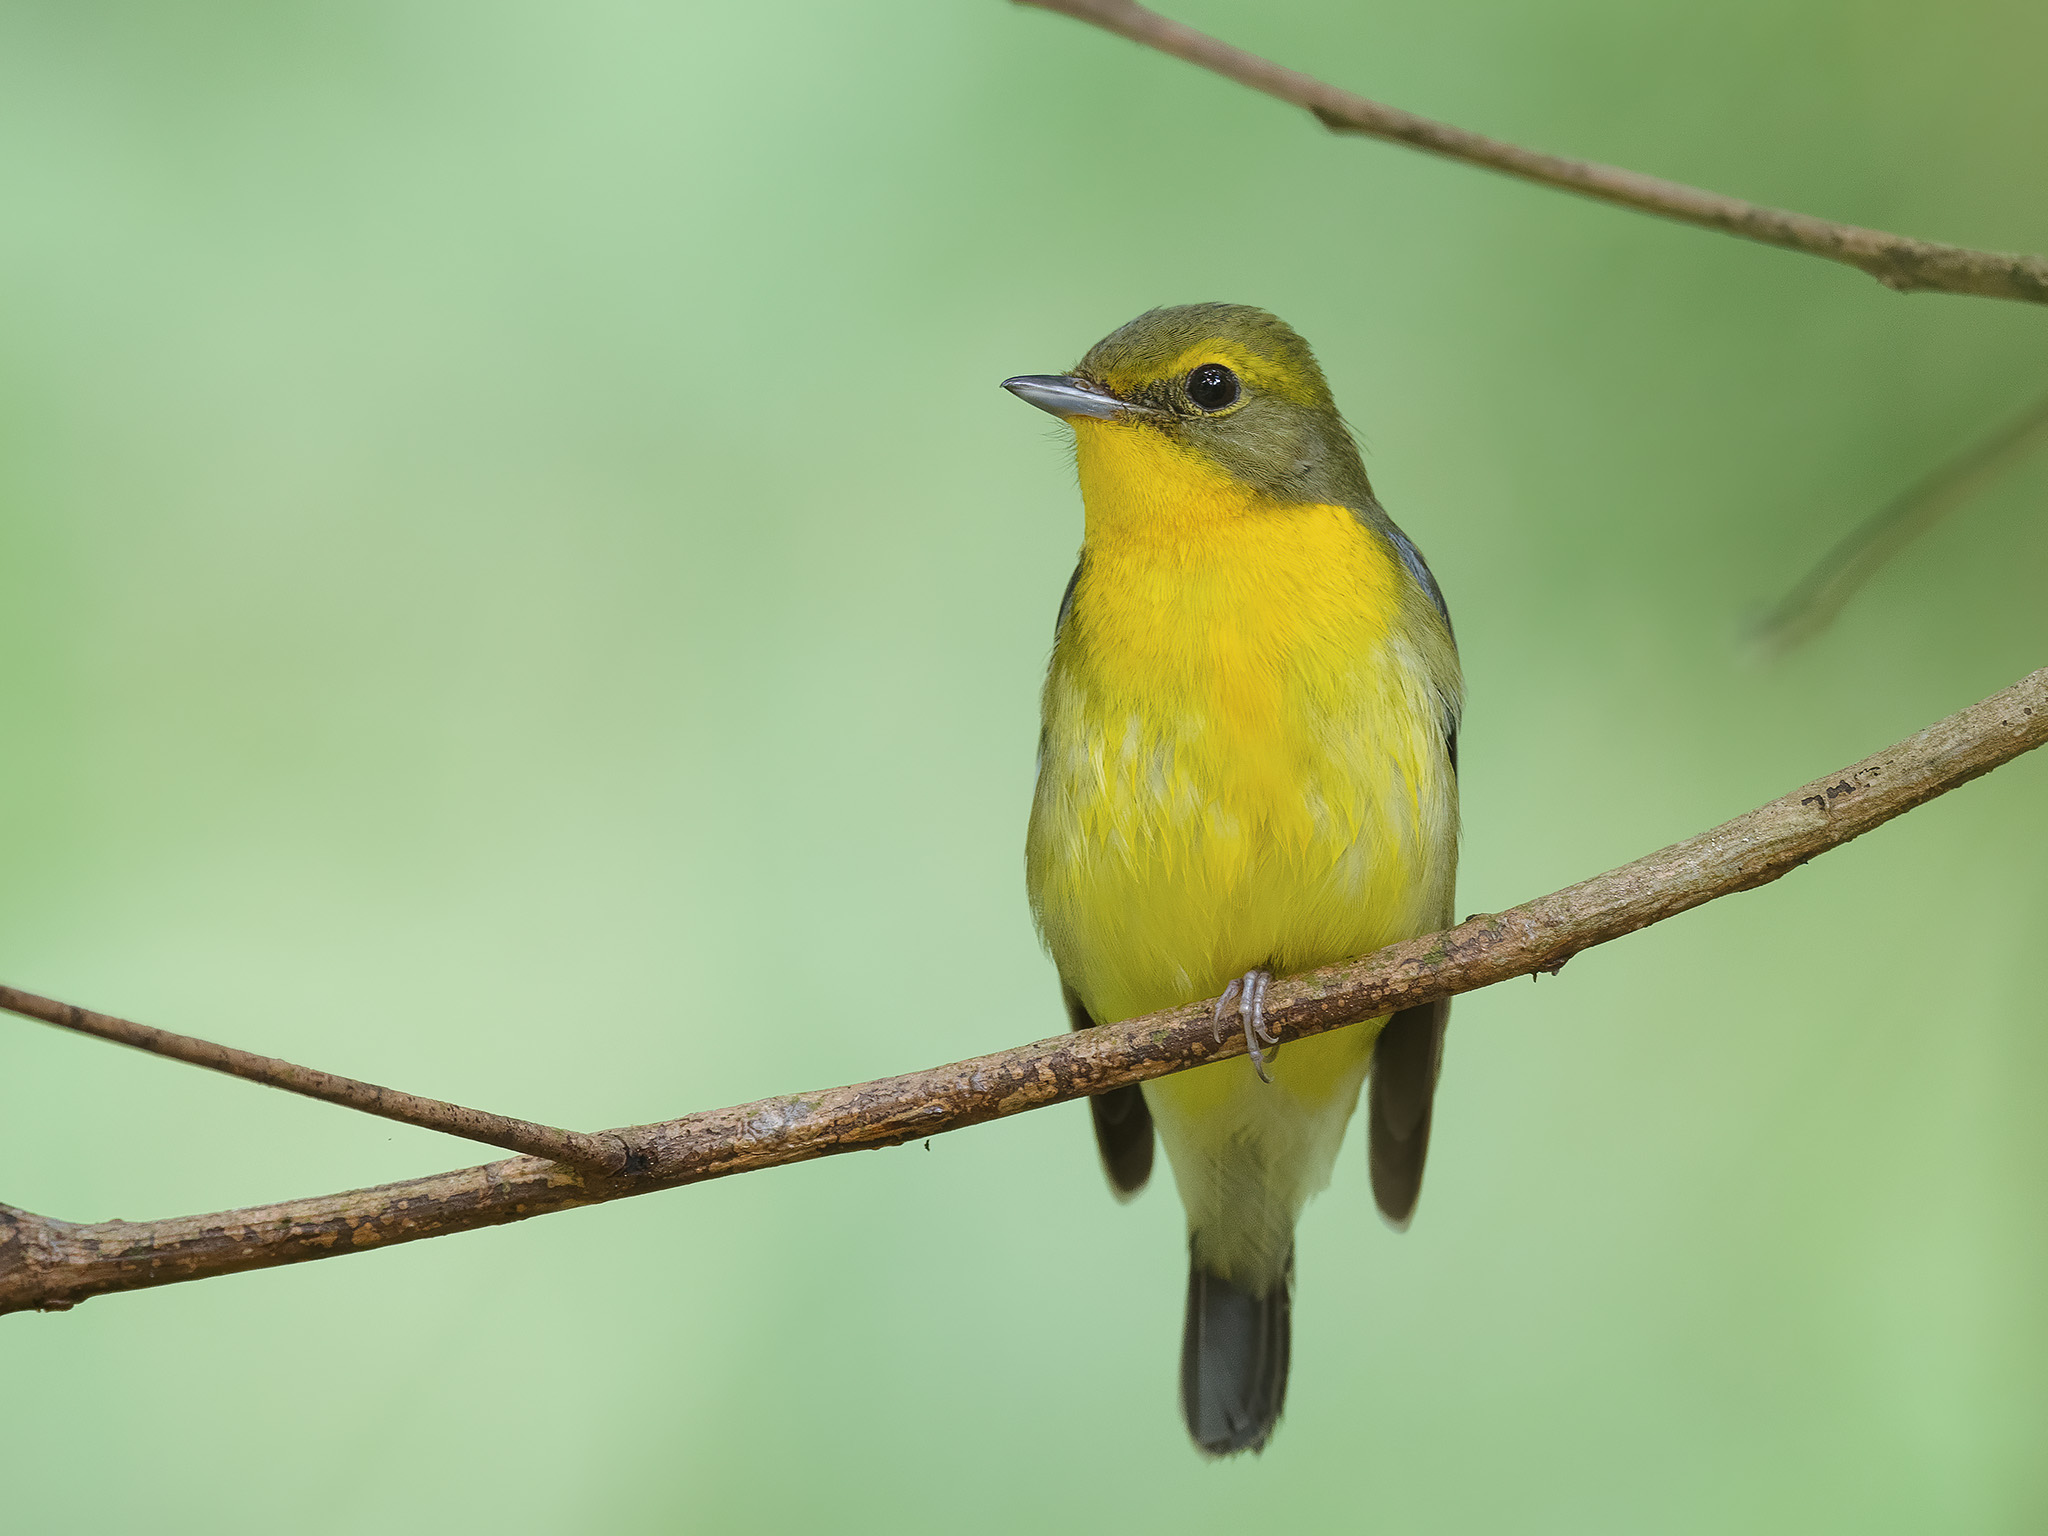 Green-backed Flycatcher at Dairy Farm Nature Park on 28 Dec 2022. Photo credit: Francis Yap